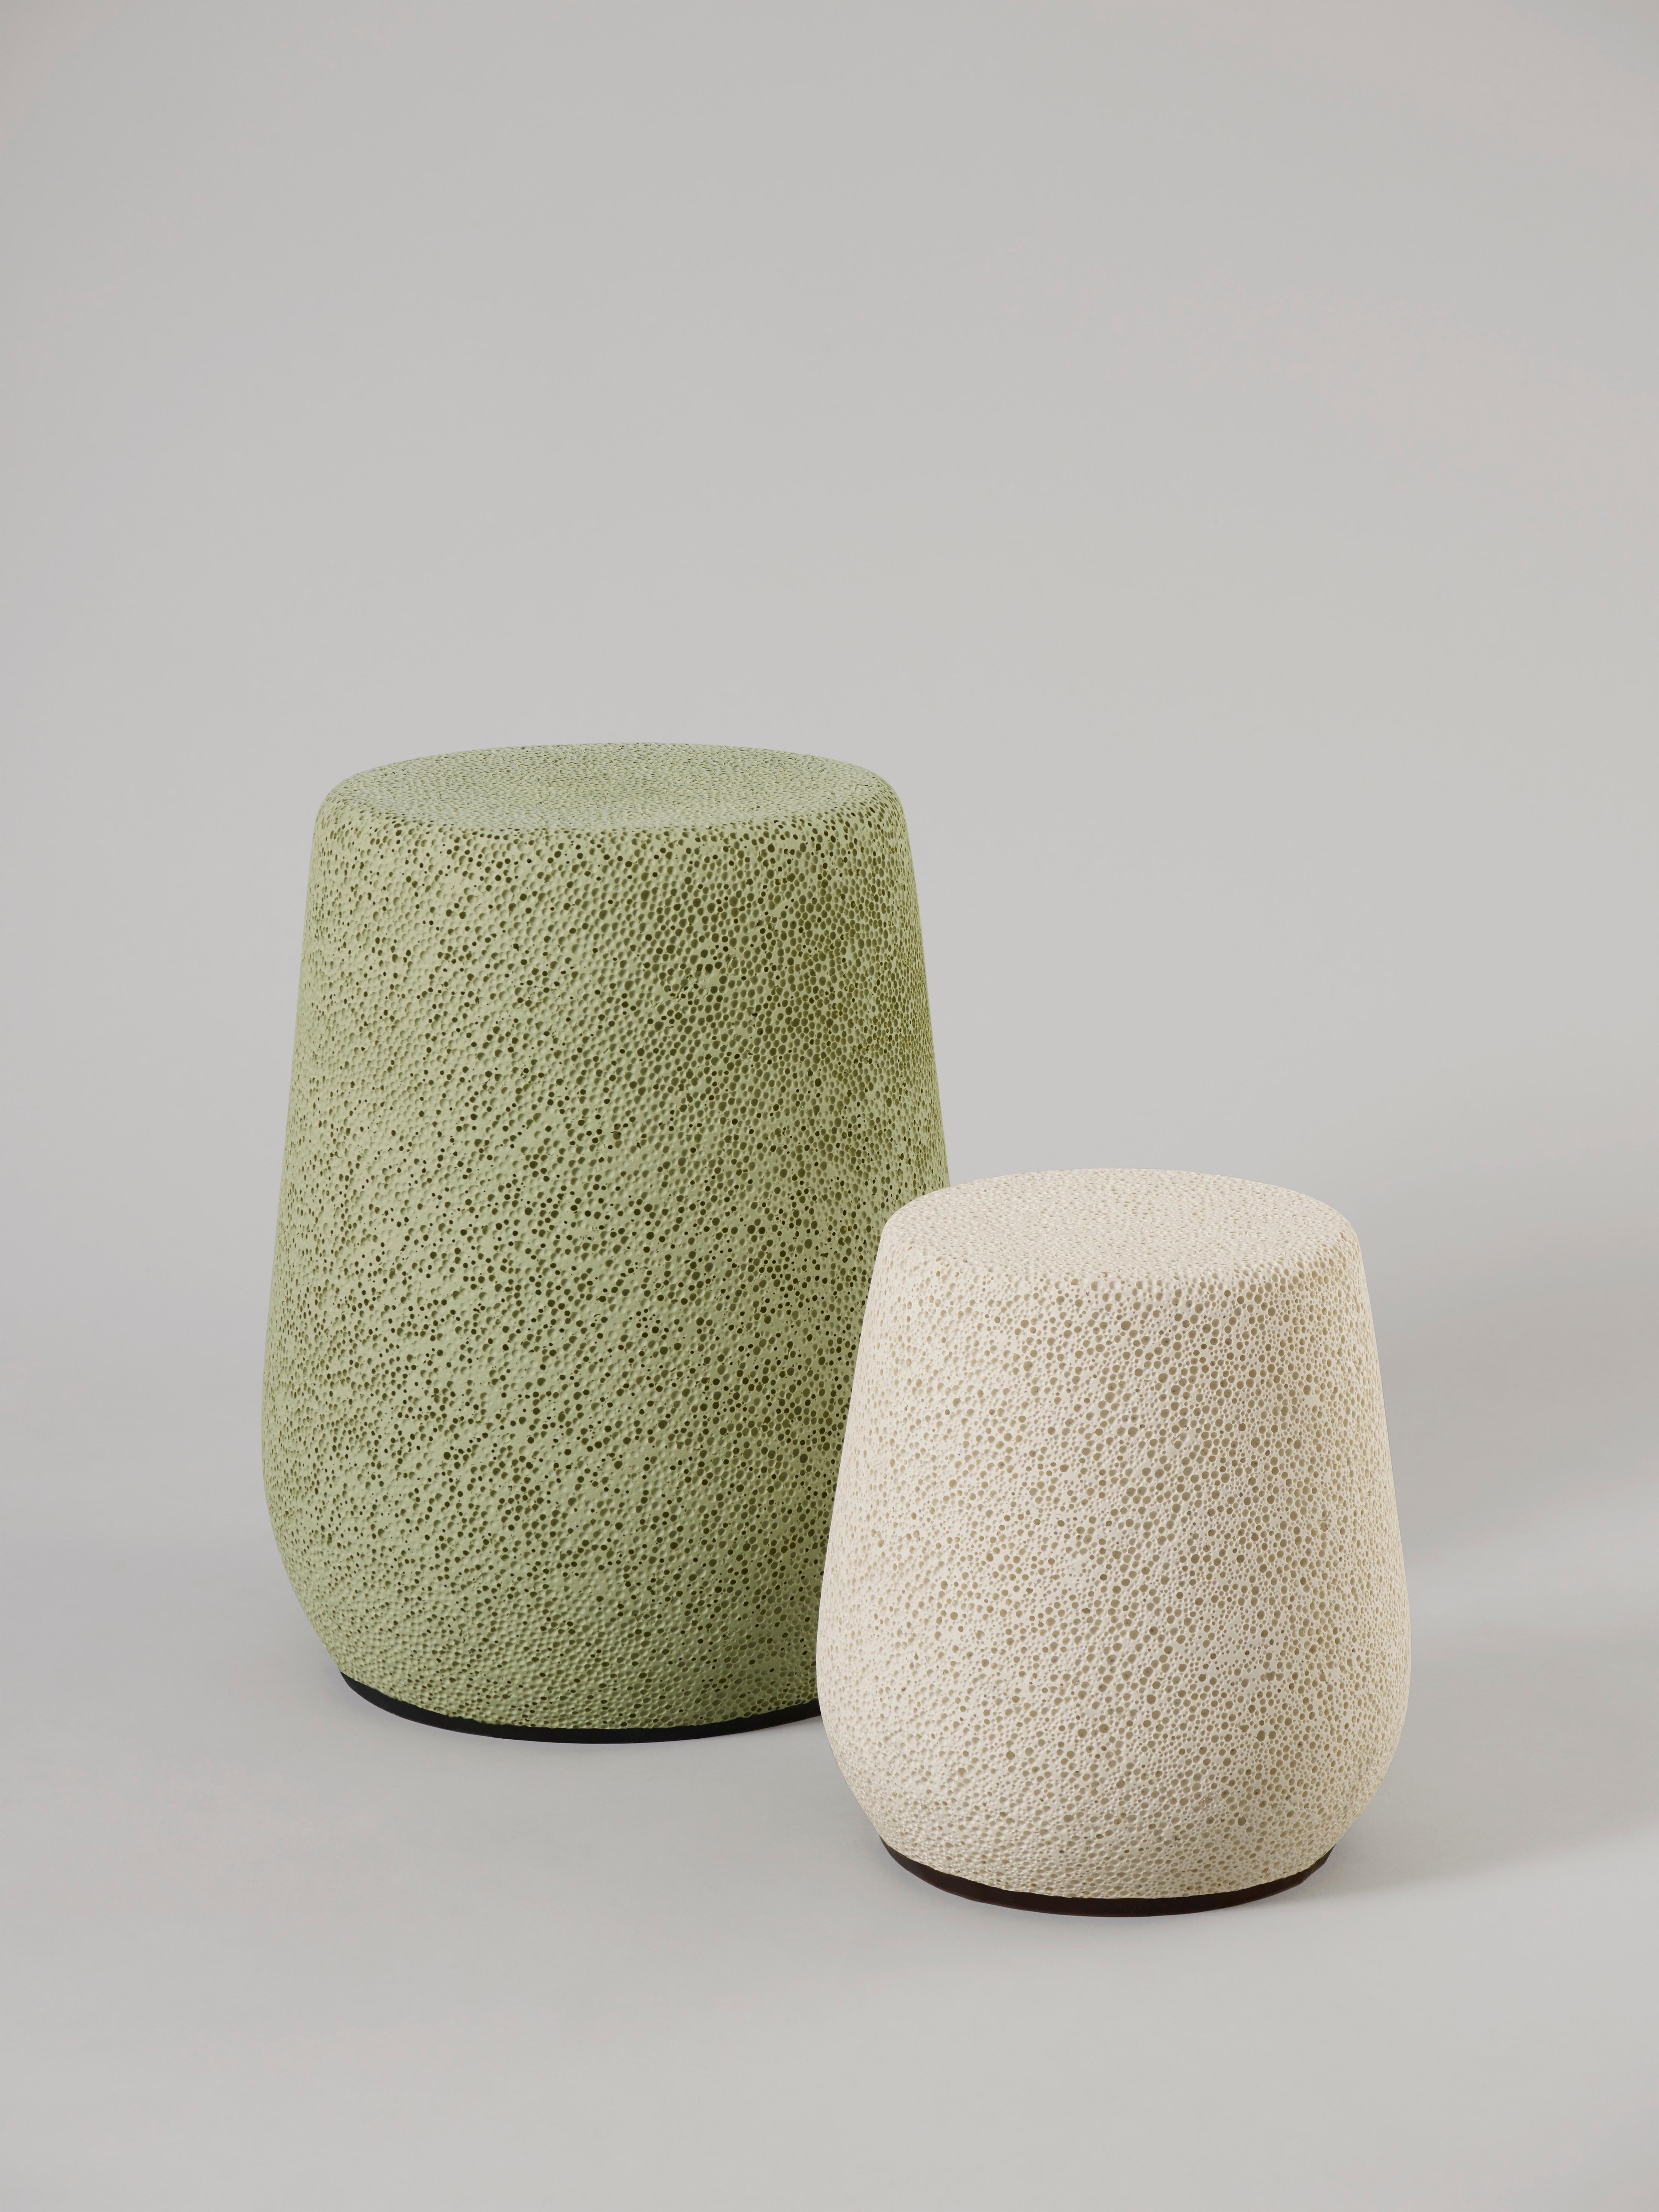 Dutch 'Lightweight Porcelain' Stool and Side Table by Djim Berger - Yellow Green For Sale